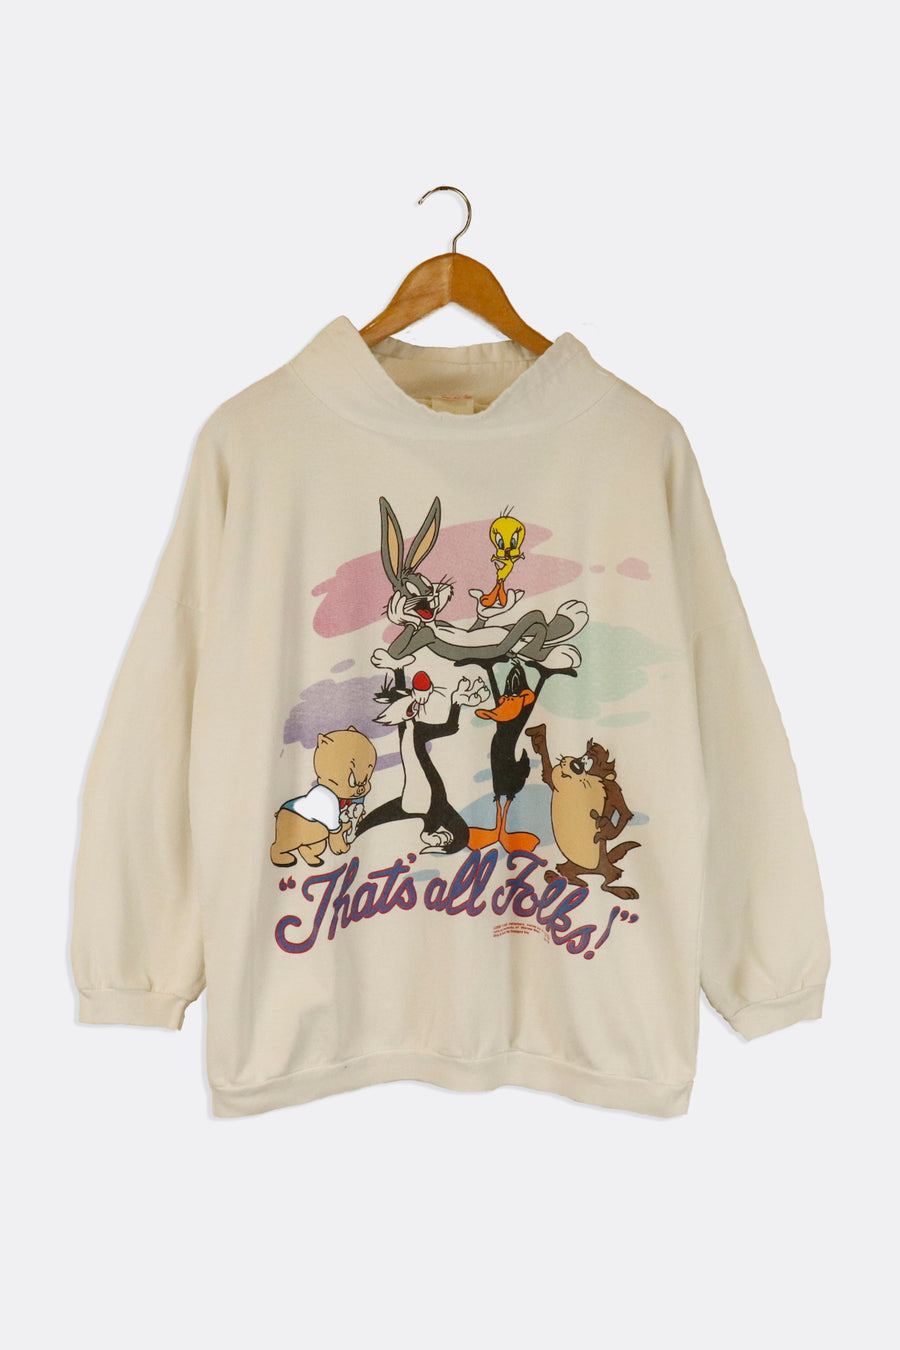 Vintage 1993 Looney Tunes That's All Folks Main Characters Collared Sweatshirt